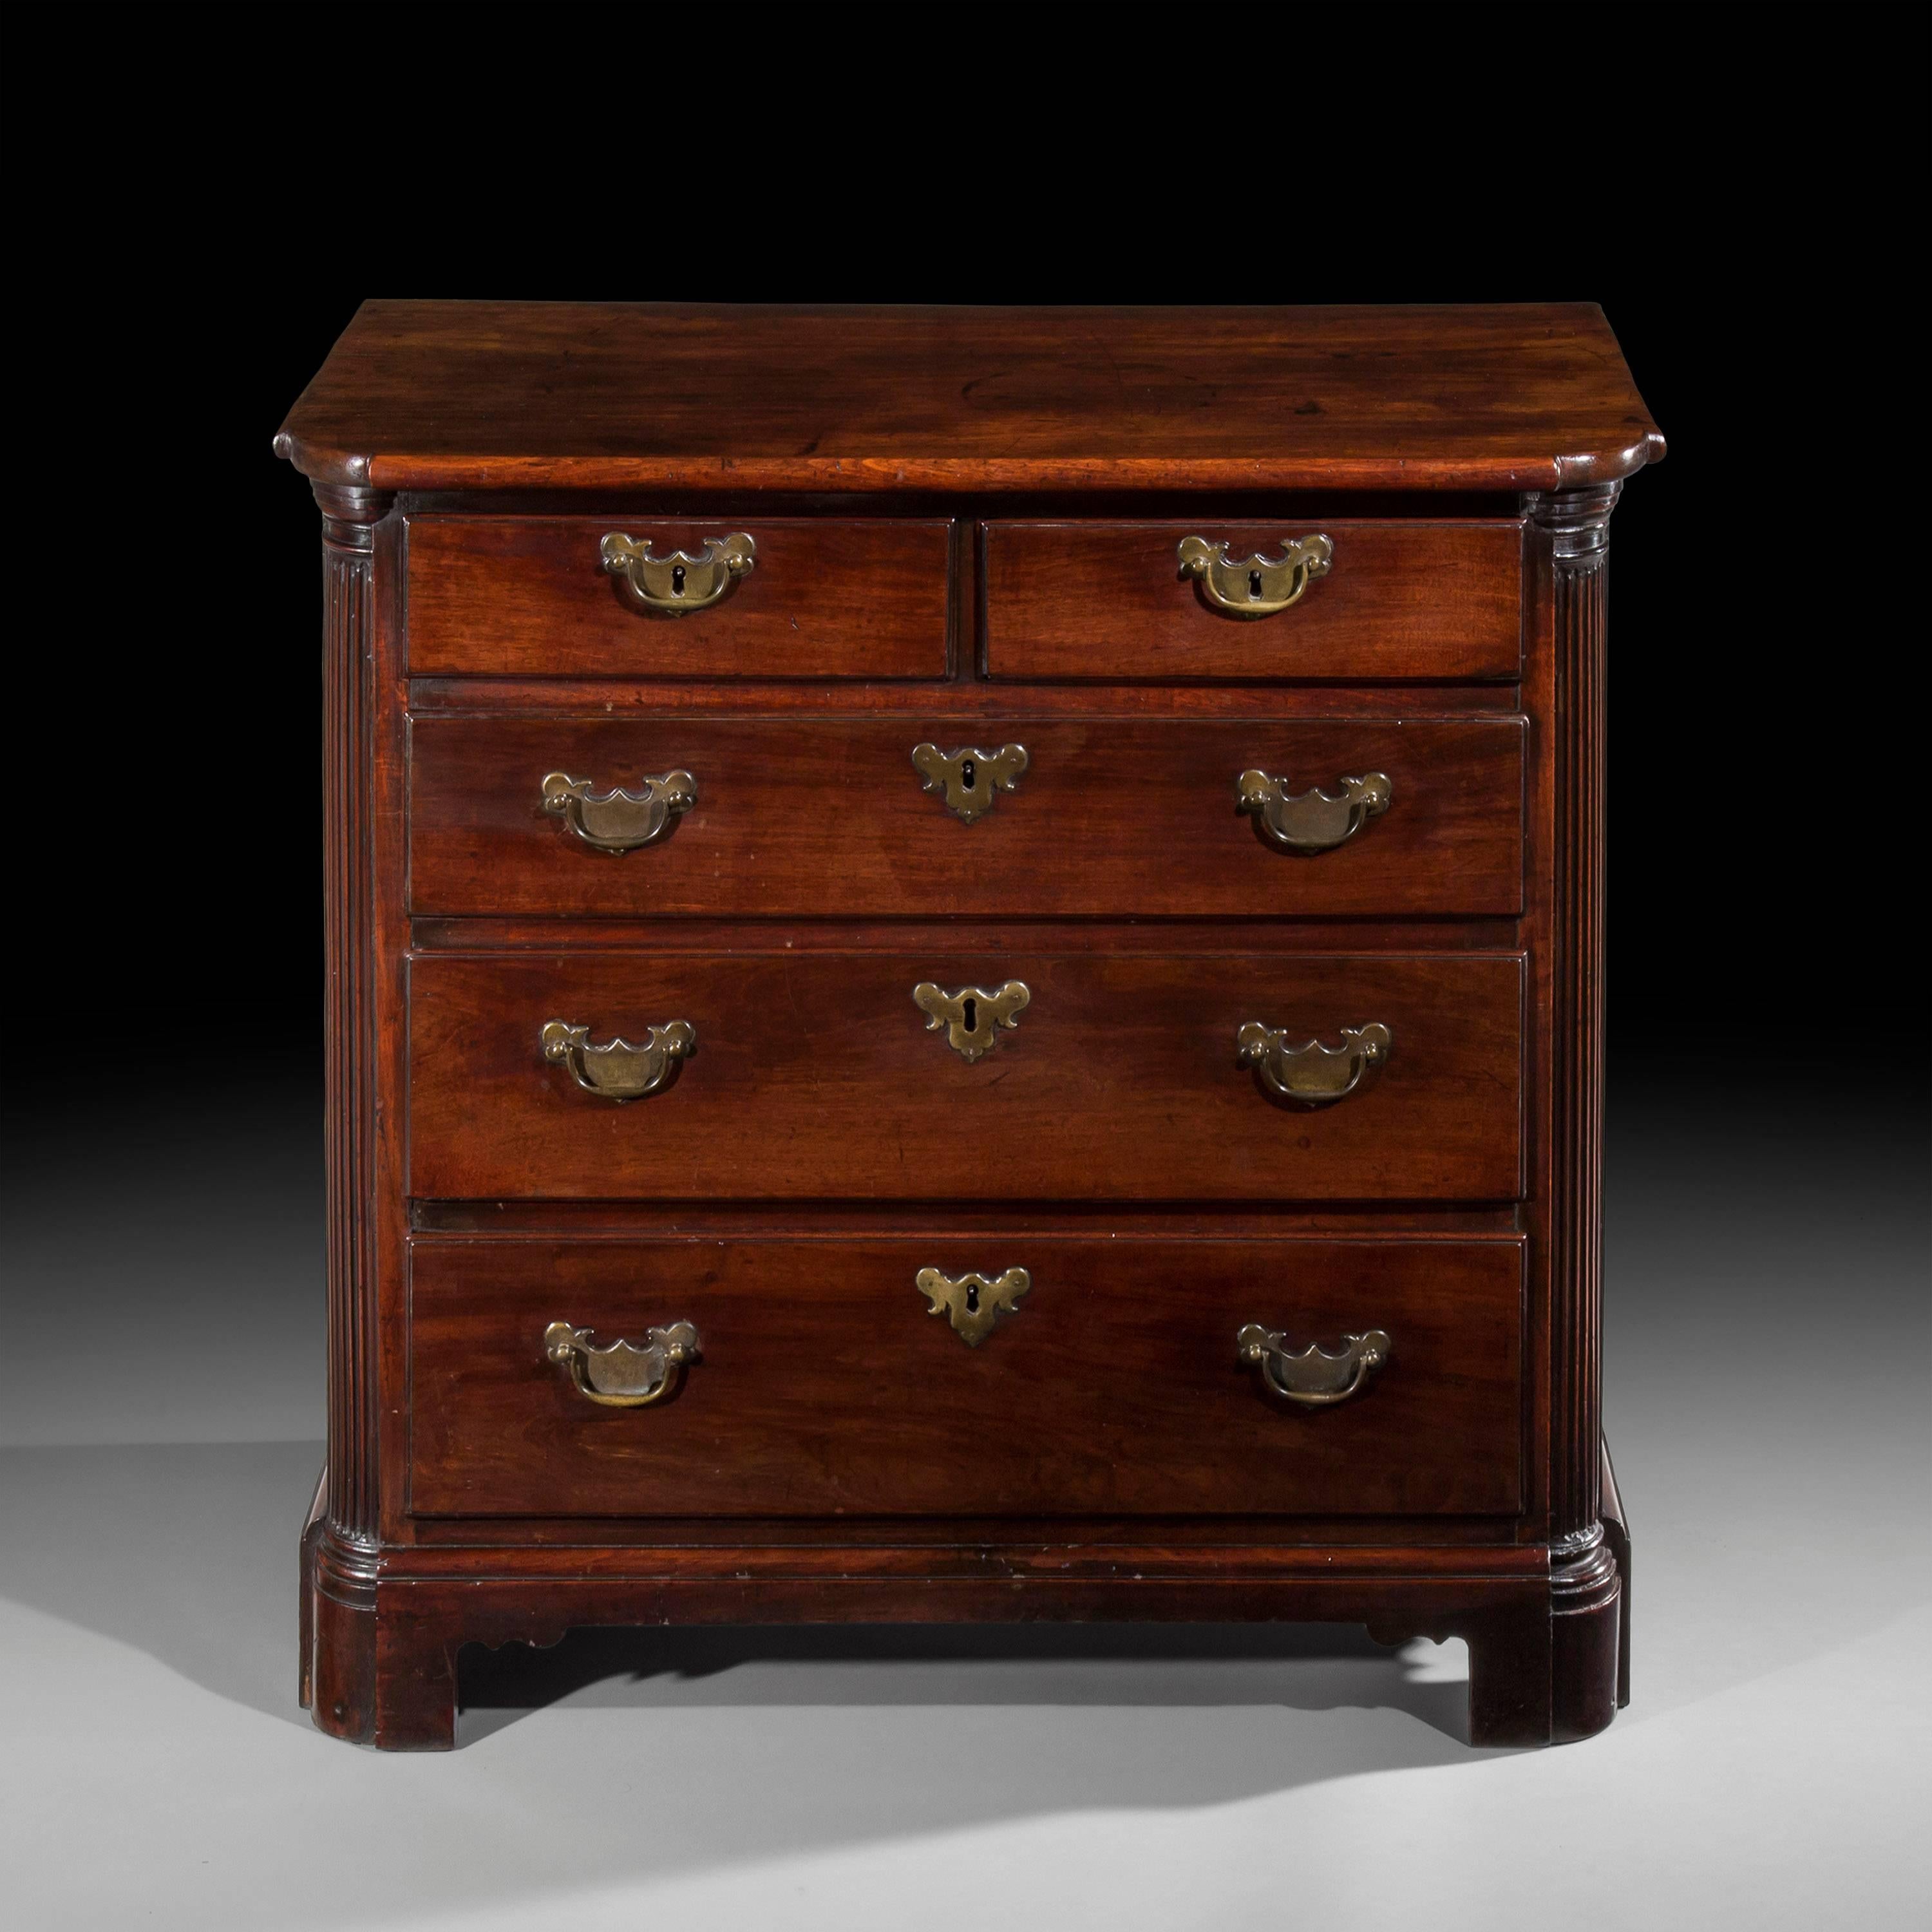 English mid-18th century George II period chest of drawers of rare architectural form and small shallow proportions, in mahogany,
Attributed to David Wright of Lancaster, circa 1740.

This handsome architectural chest of drawers of pleasing petite